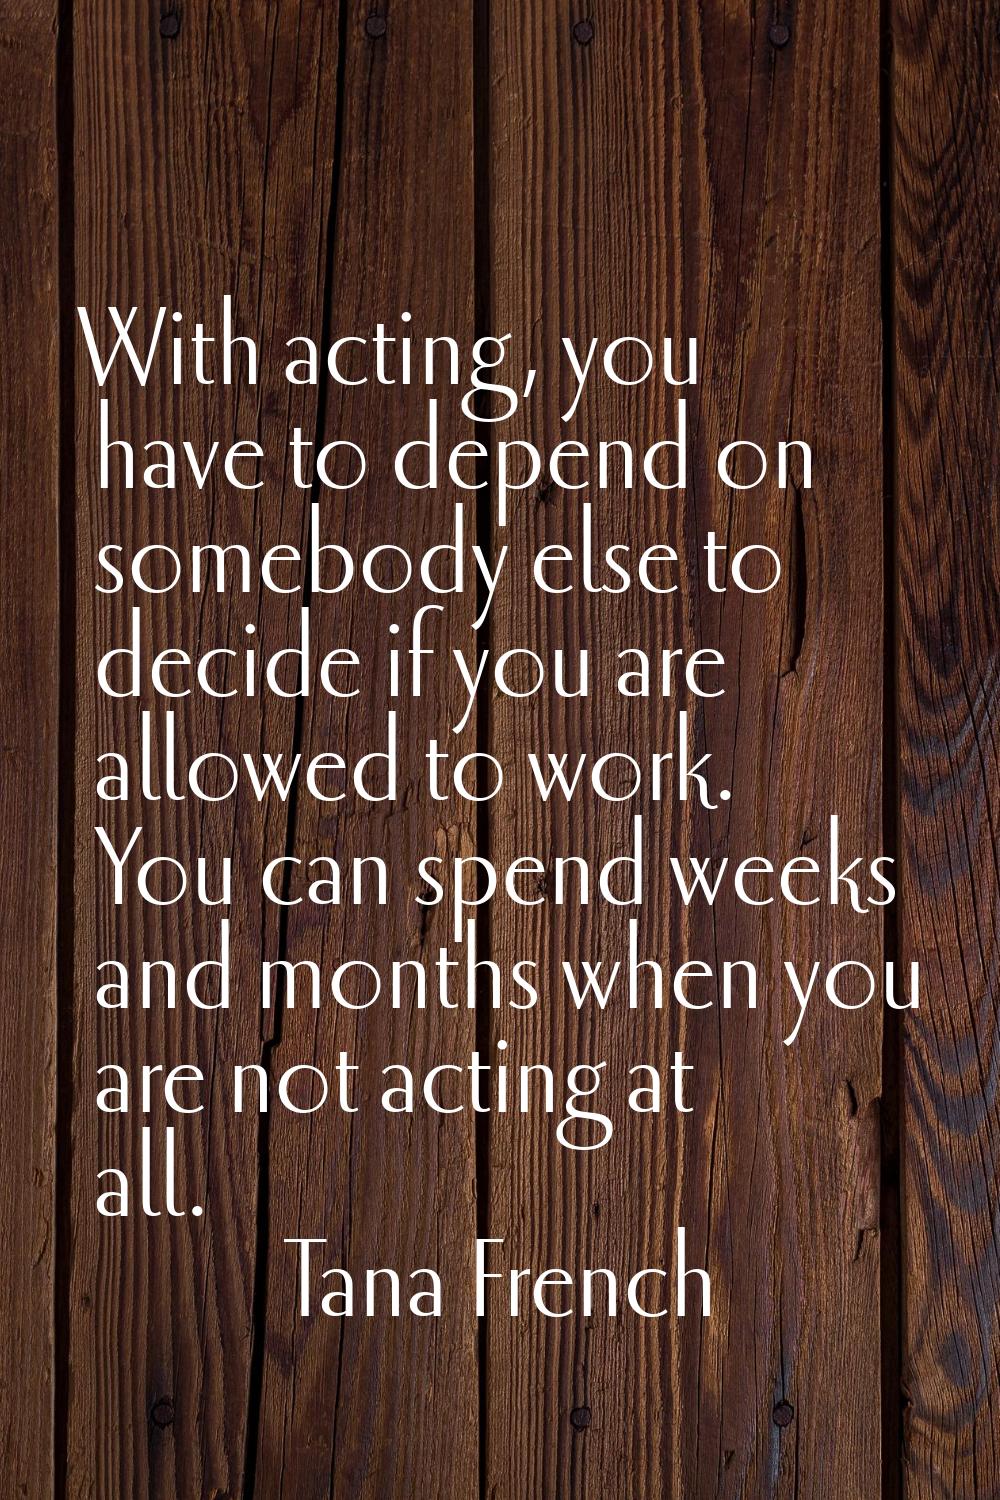 With acting, you have to depend on somebody else to decide if you are allowed to work. You can spen